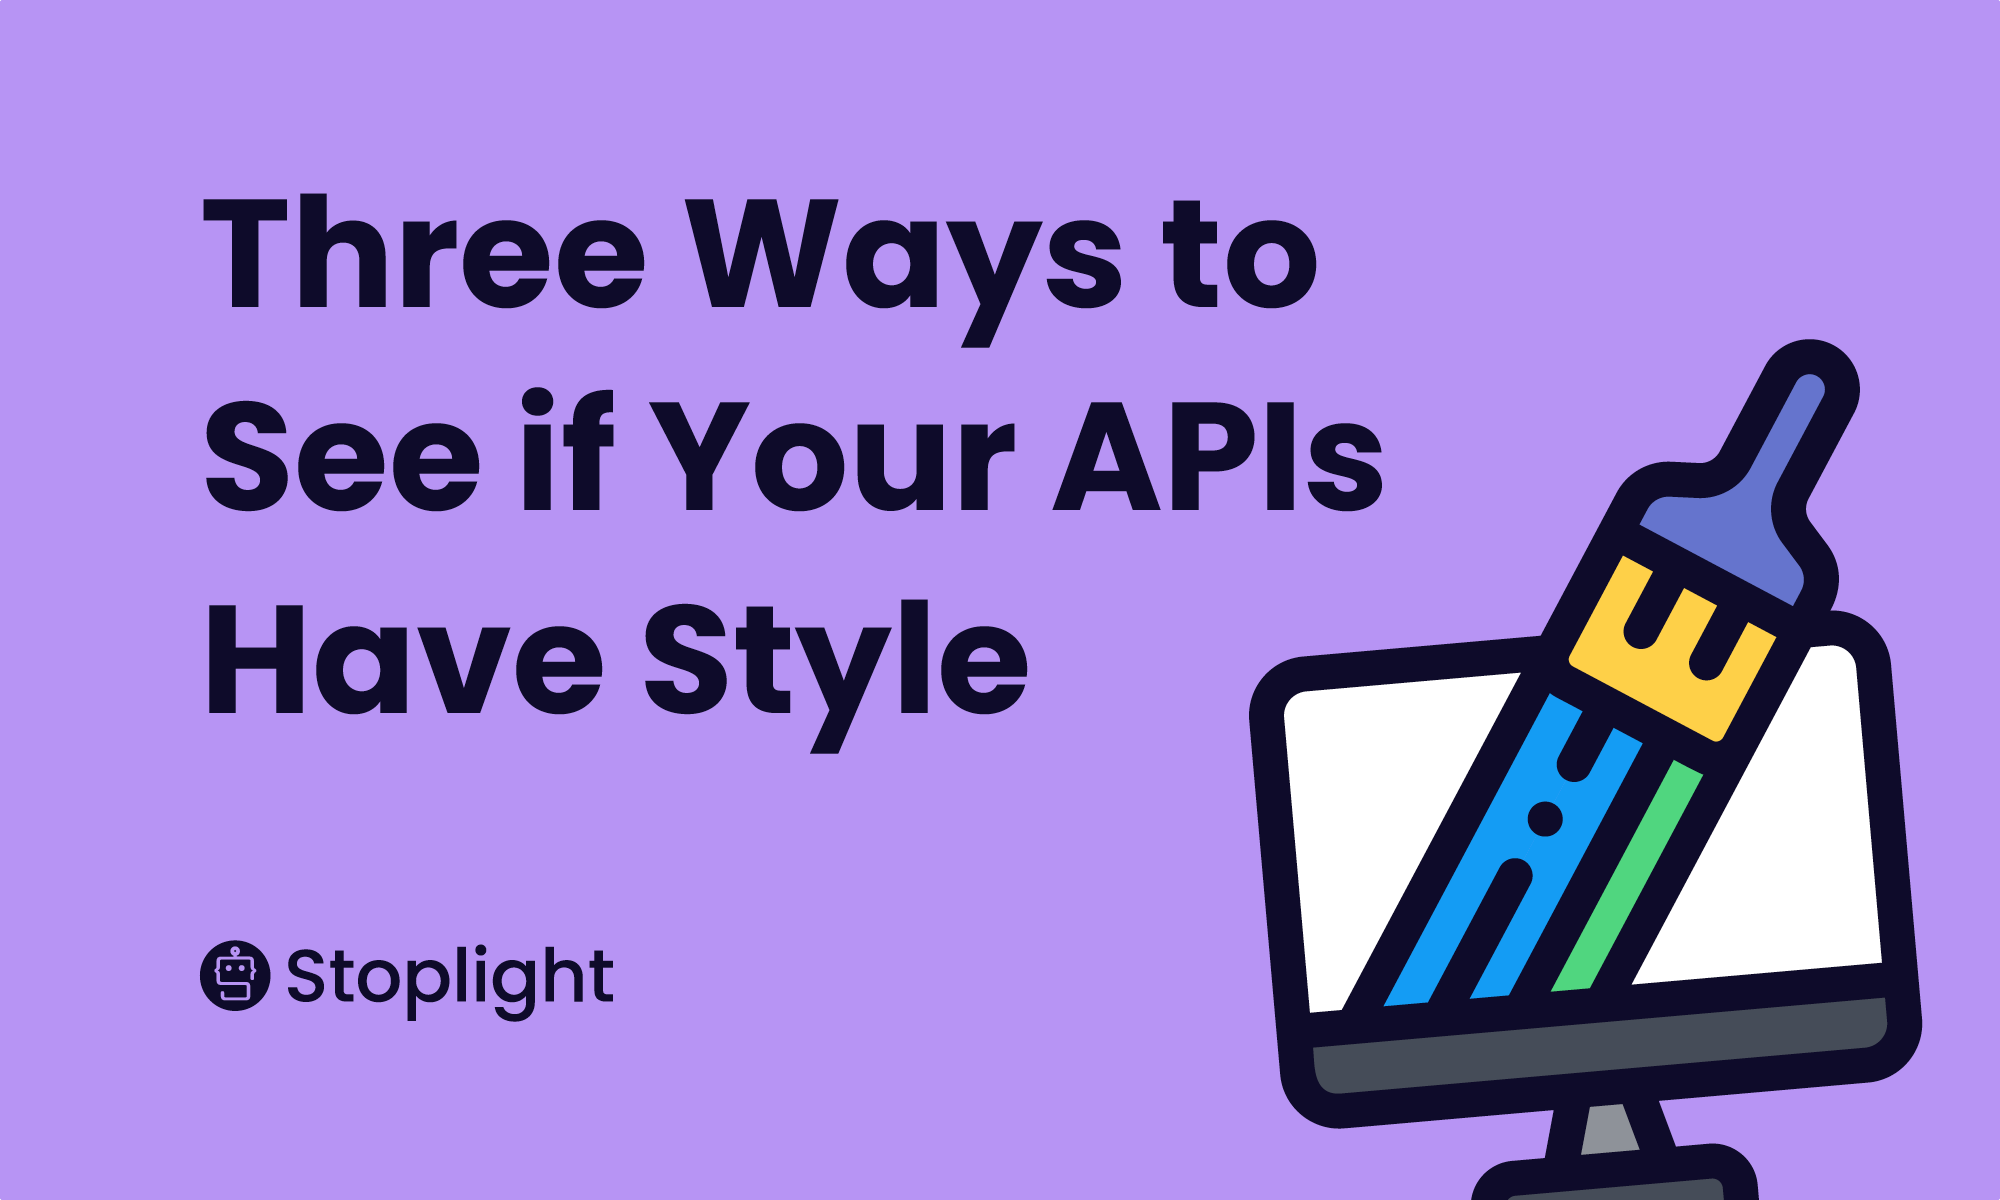 Three Ways to See If Your APIs Have Style